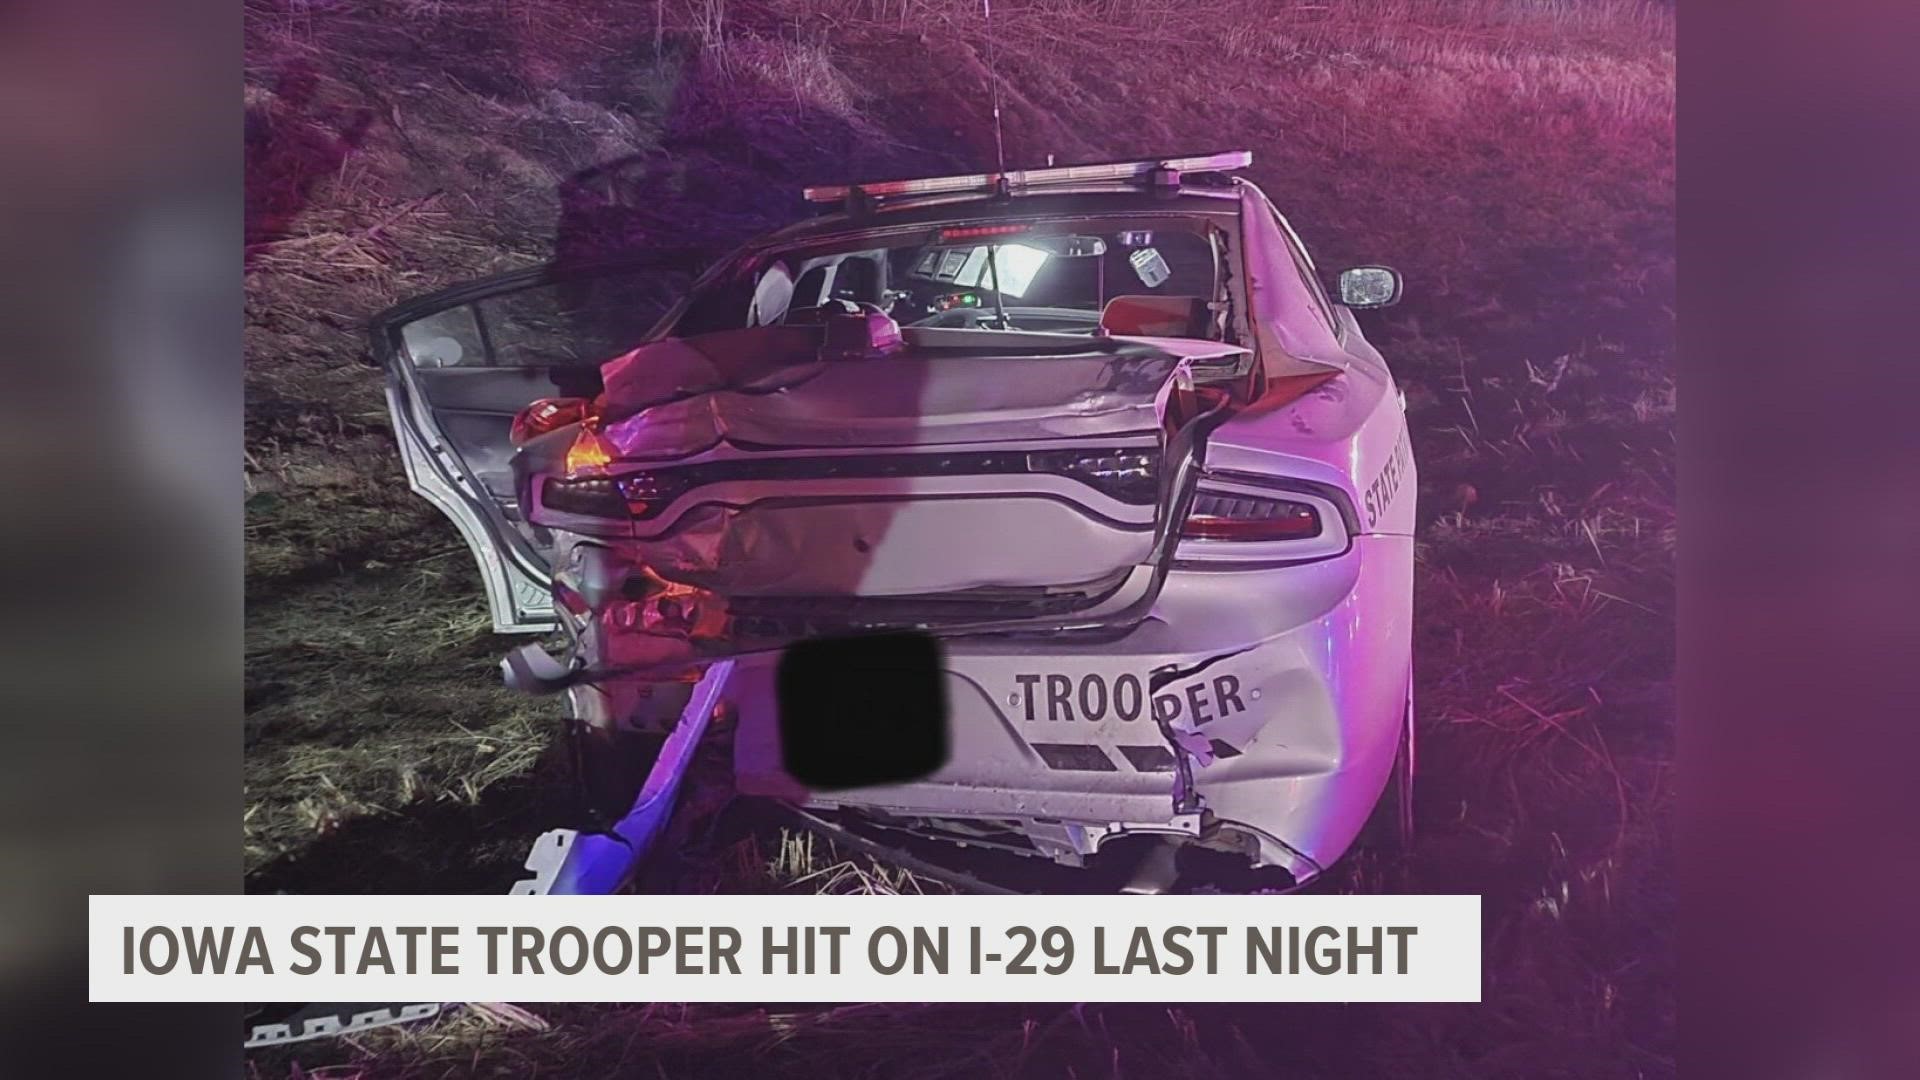 ISP said a trooper and the driver of another car suffered minor injuries, but the passenger of the other car has life-threatening injuries.